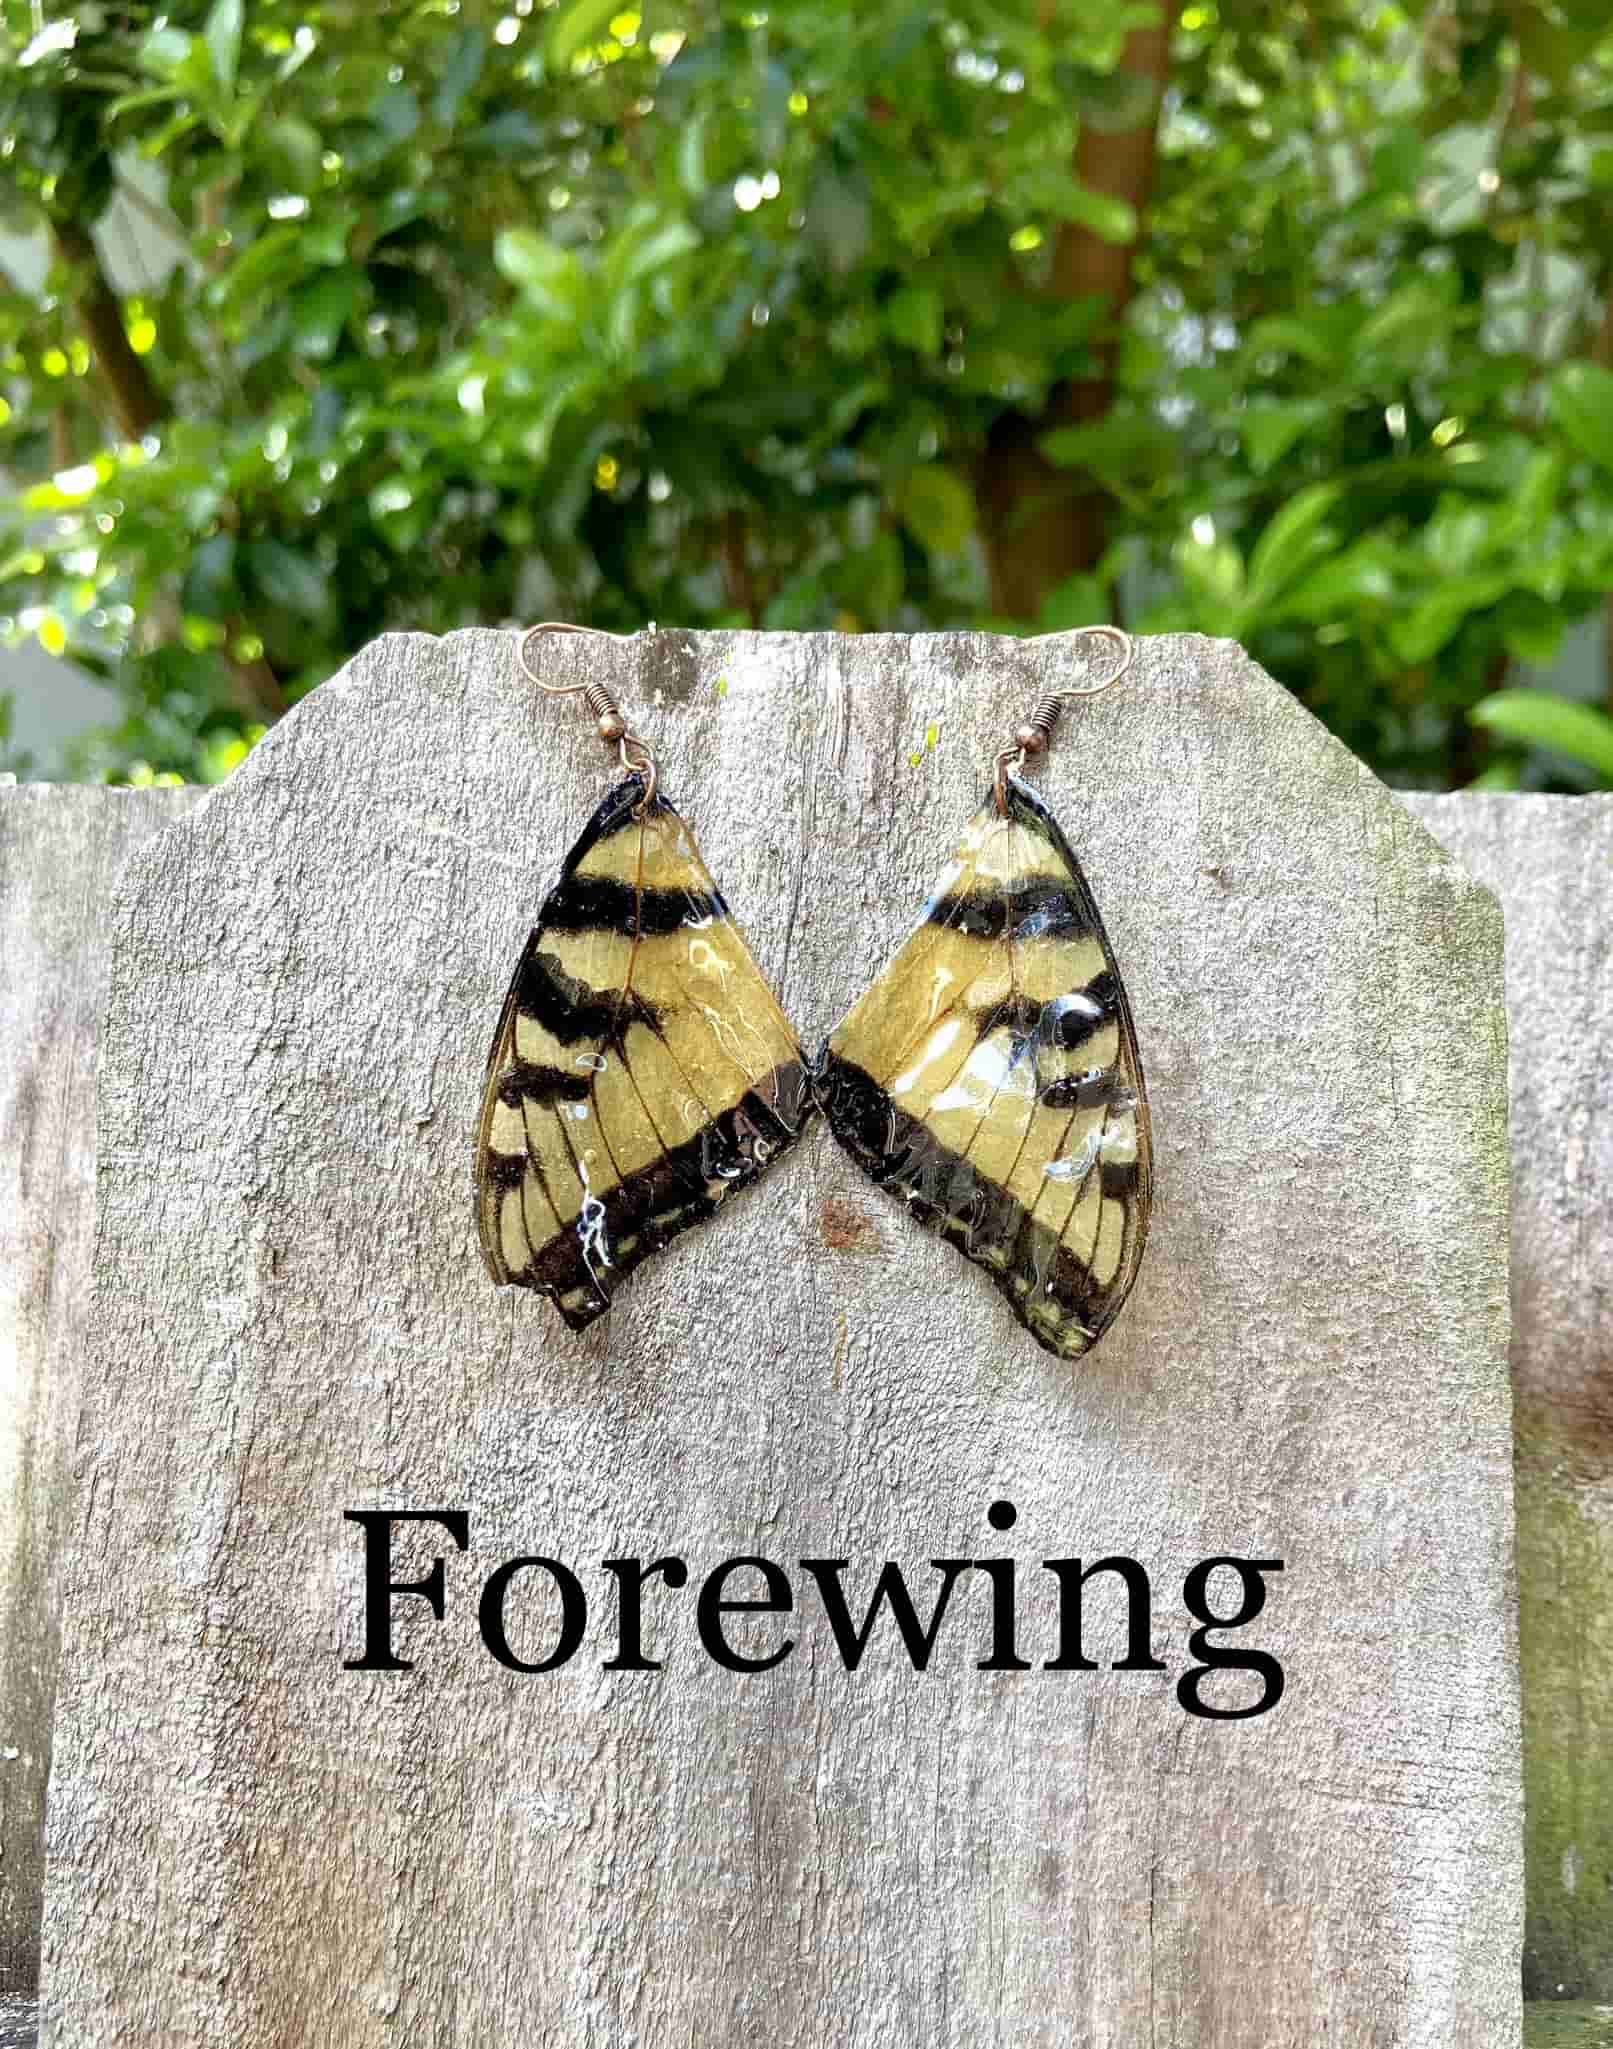 Made from wild harvested Eastern Tiger Swallowtail forewing wings coated in resin, each earring is one-of-a-kind. 100% copper jewelry.